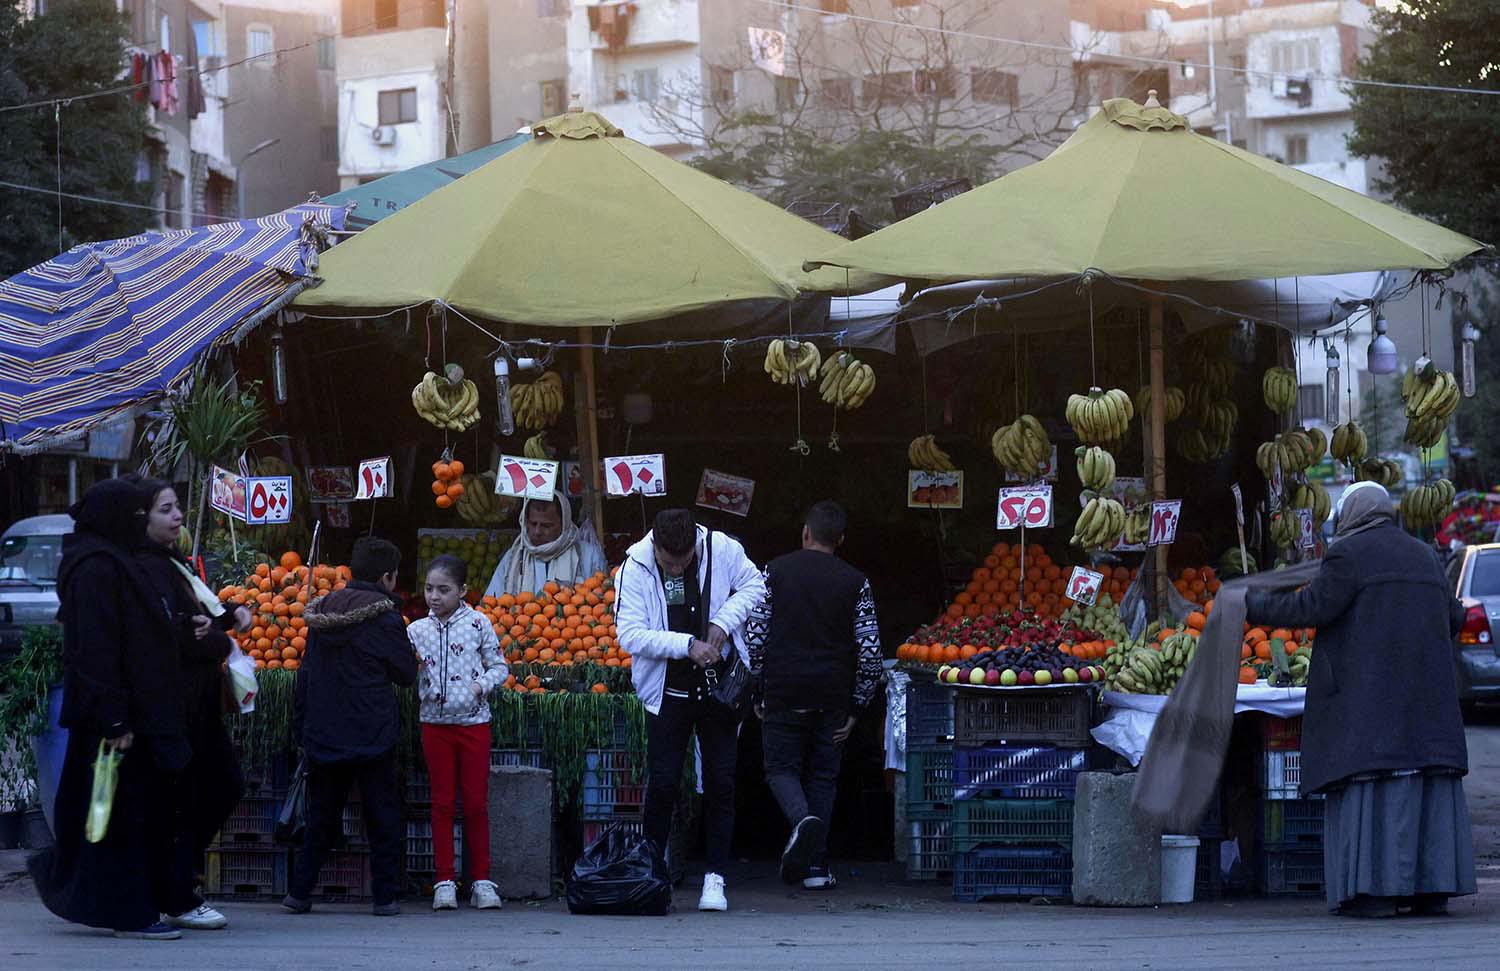 The IMF agreed to widen the agreement after Egypt's economy was further hurt by the Gaza crisis